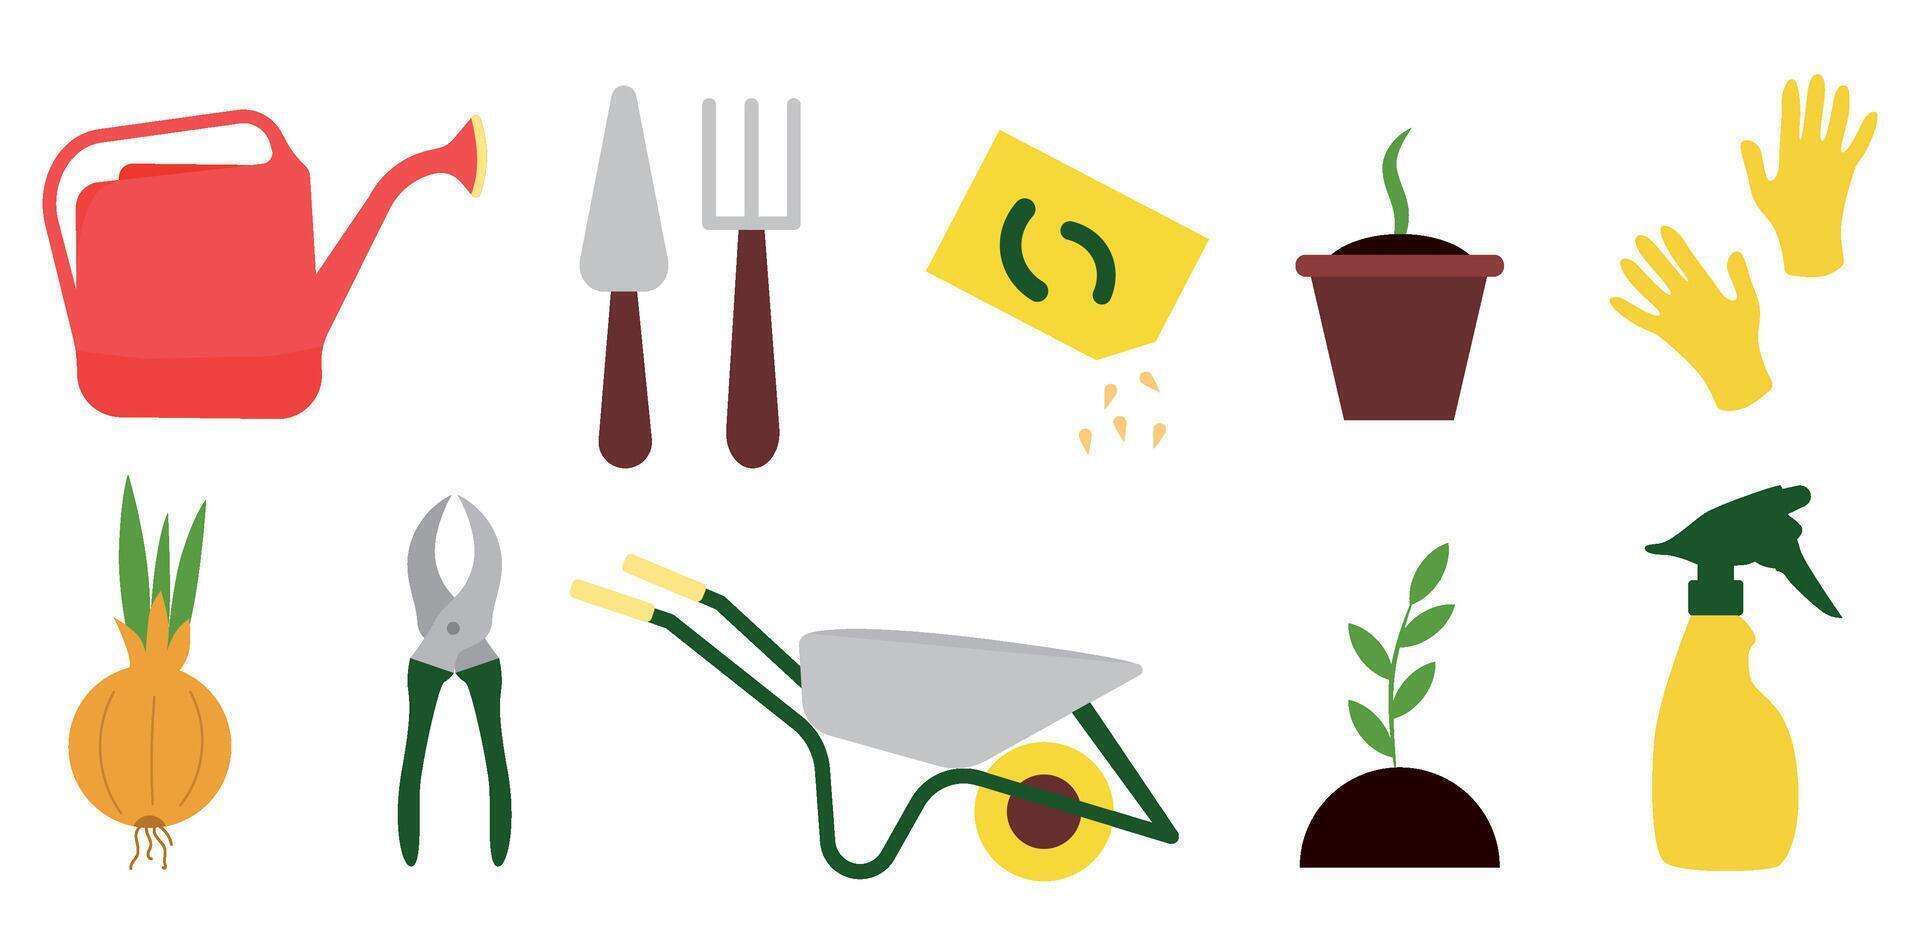 A large collection of garden tools, seeds and plants for the garden. Gardening, growing plants. Design elements in flat cartoon style. Vector illustration.